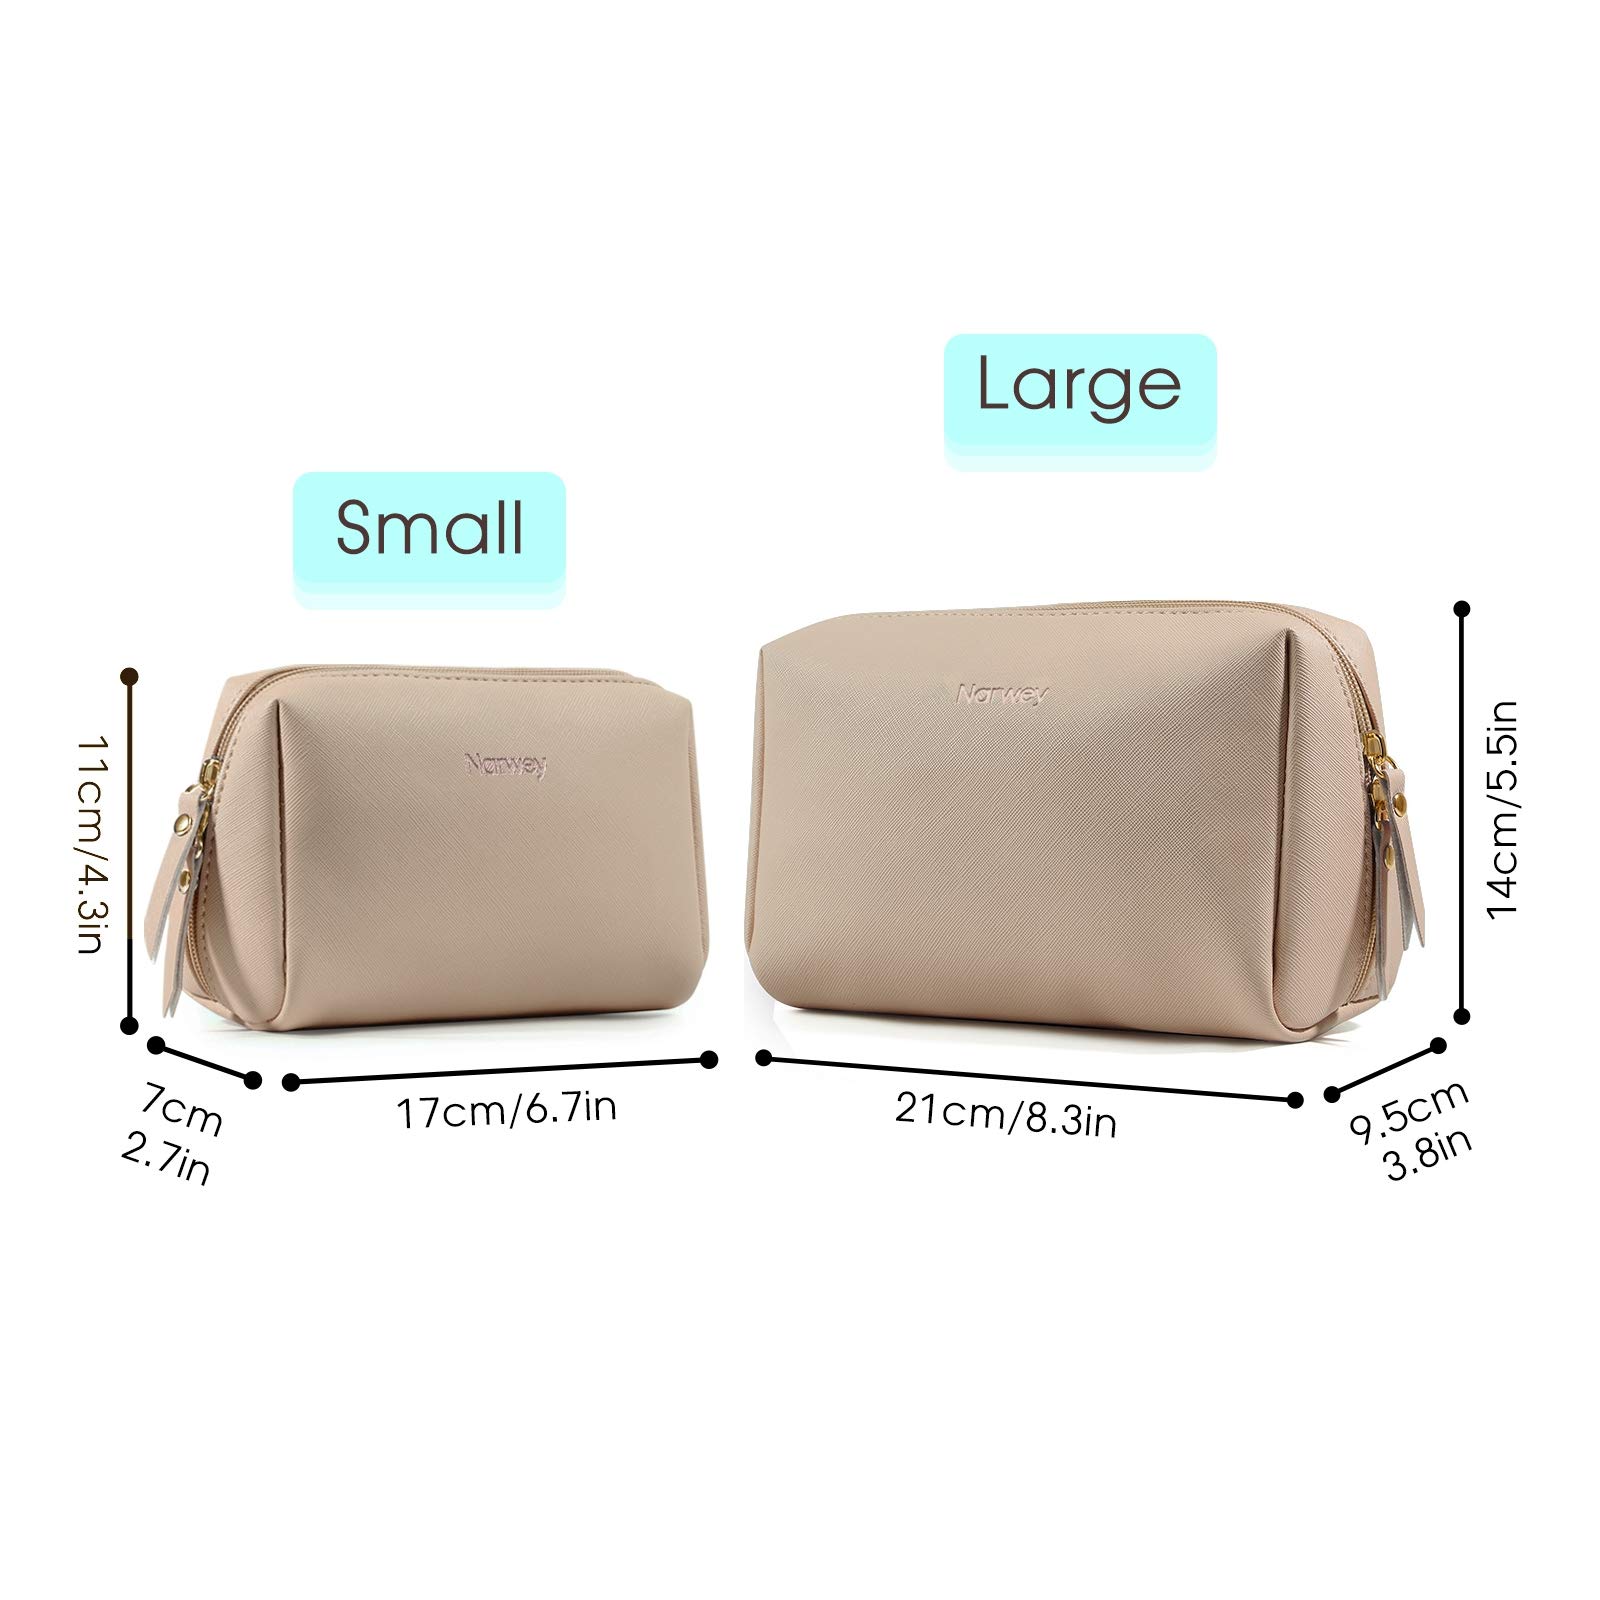 Large Vegan Leather Makeup Bag Zipper Pouch Travel Cosmetic Organizer for Women (Large, Brown)